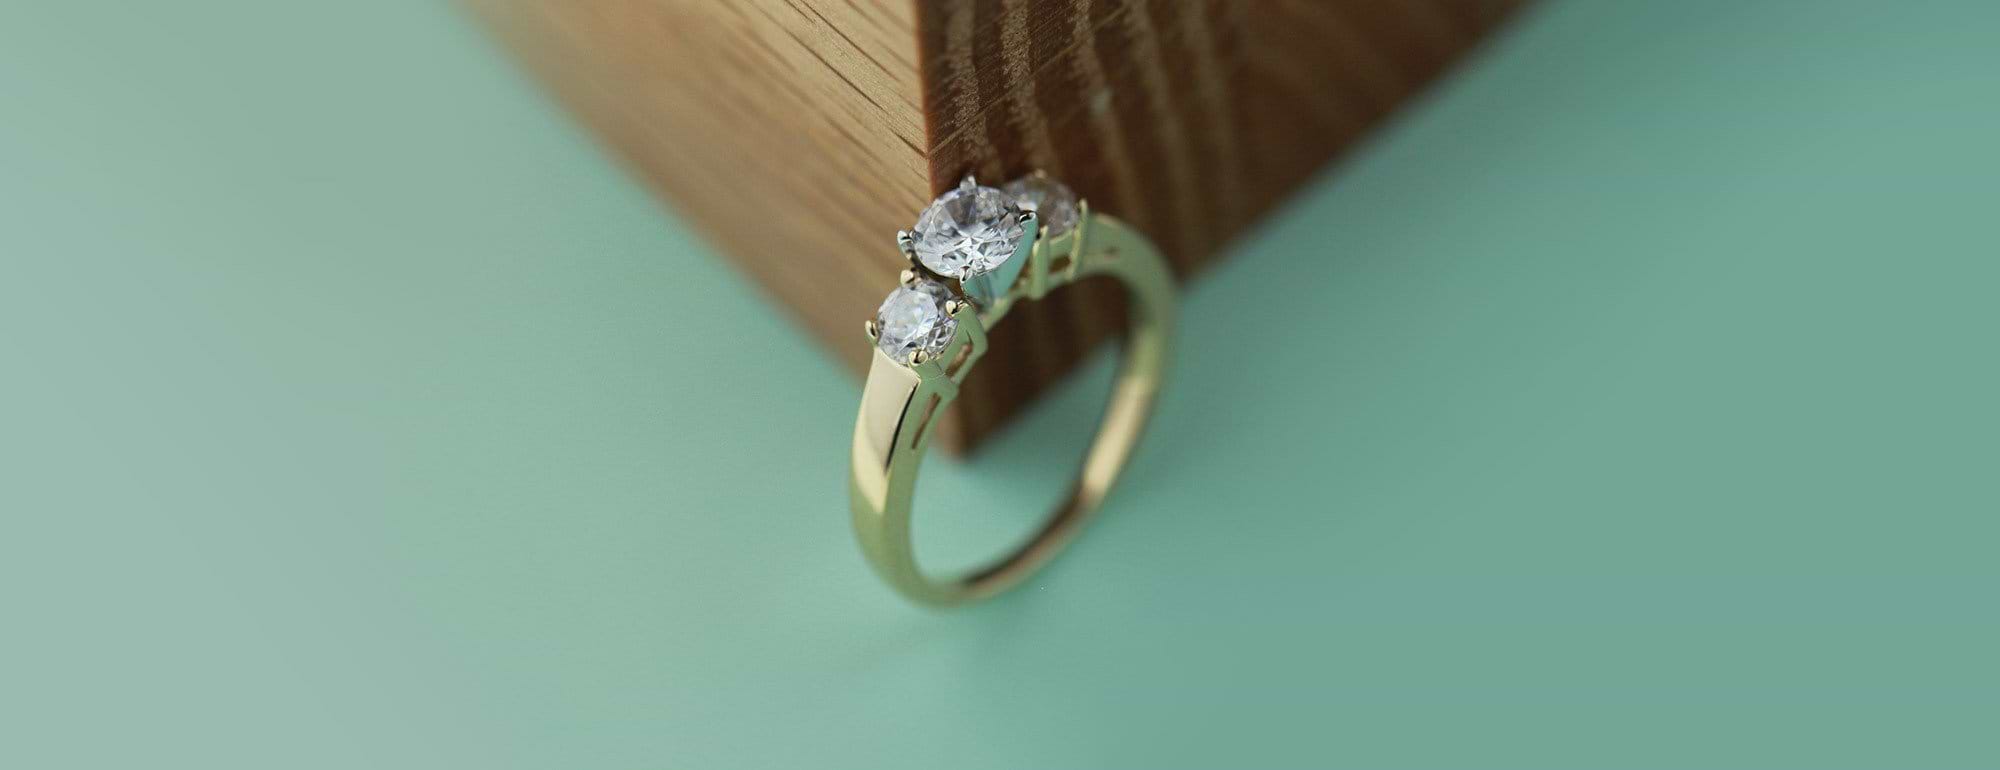 Top 10 Conflict Free Engagement Rings of 2015